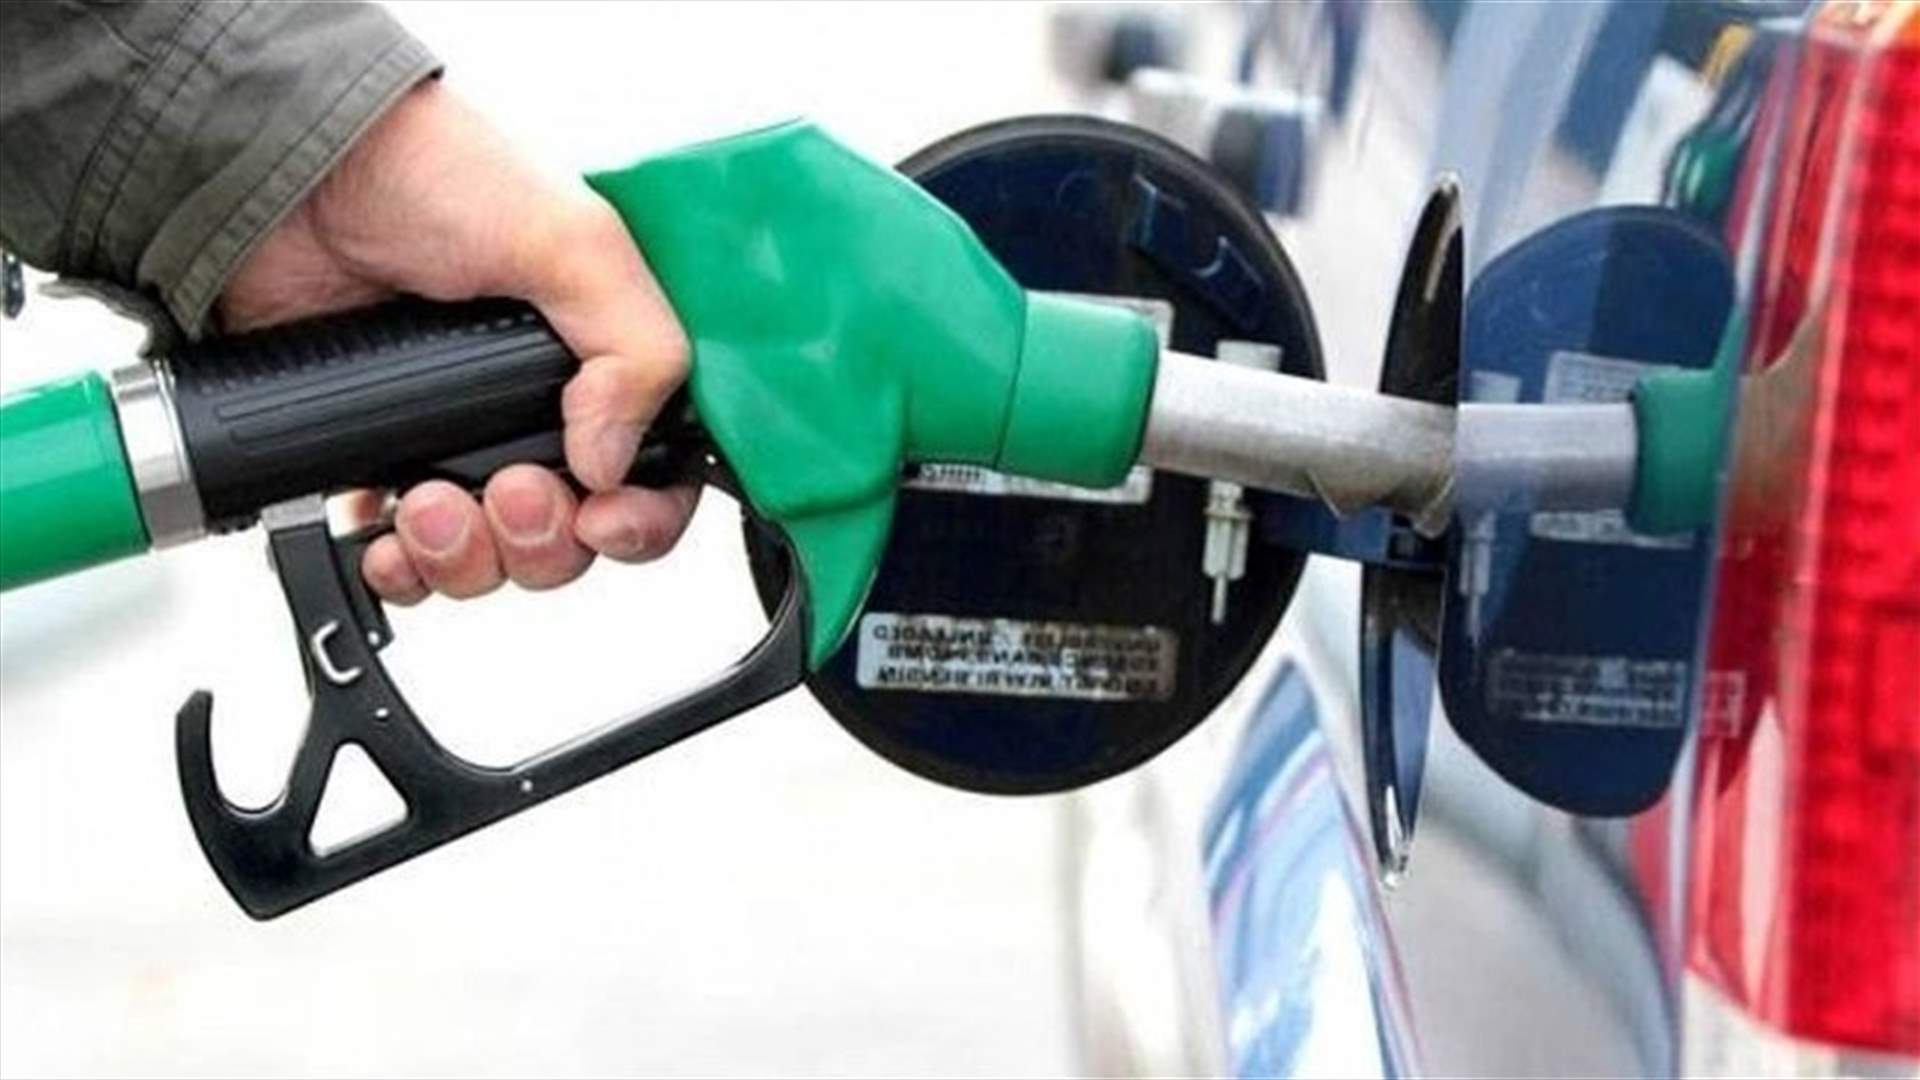 Significant drop in diesel and gas prices